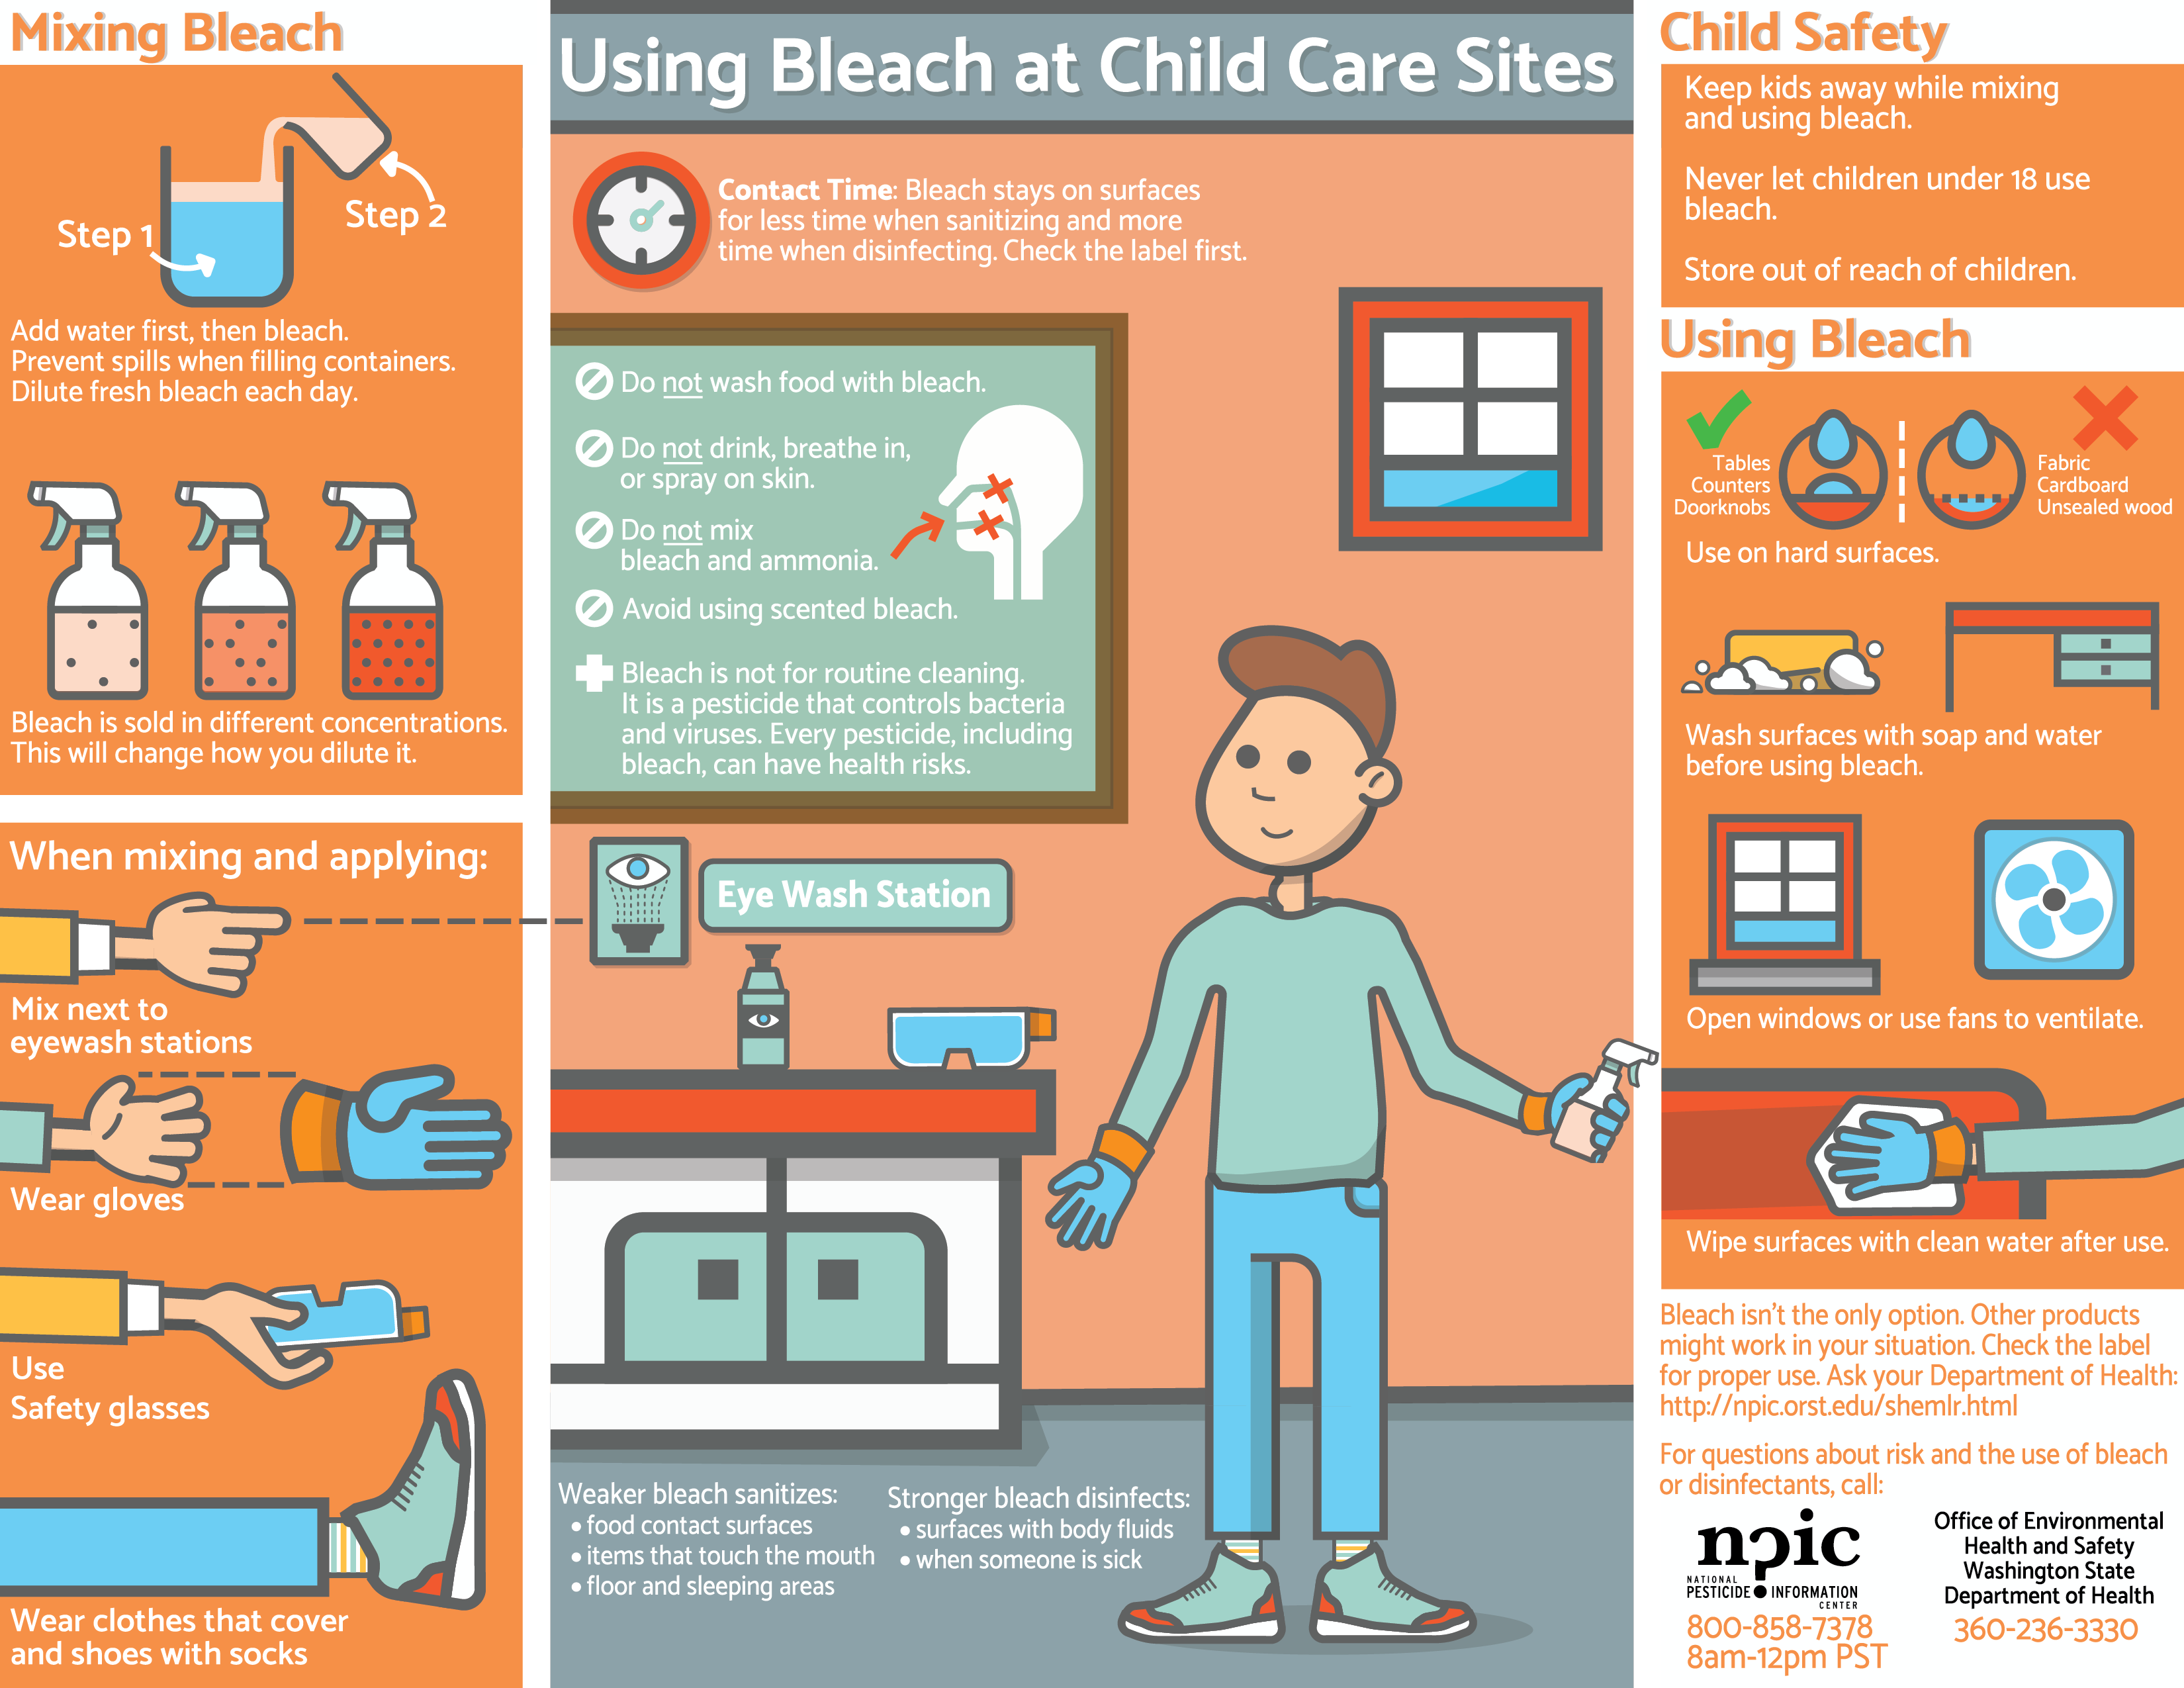 http://npic.orst.edu/outreach/bleach-infographic.png